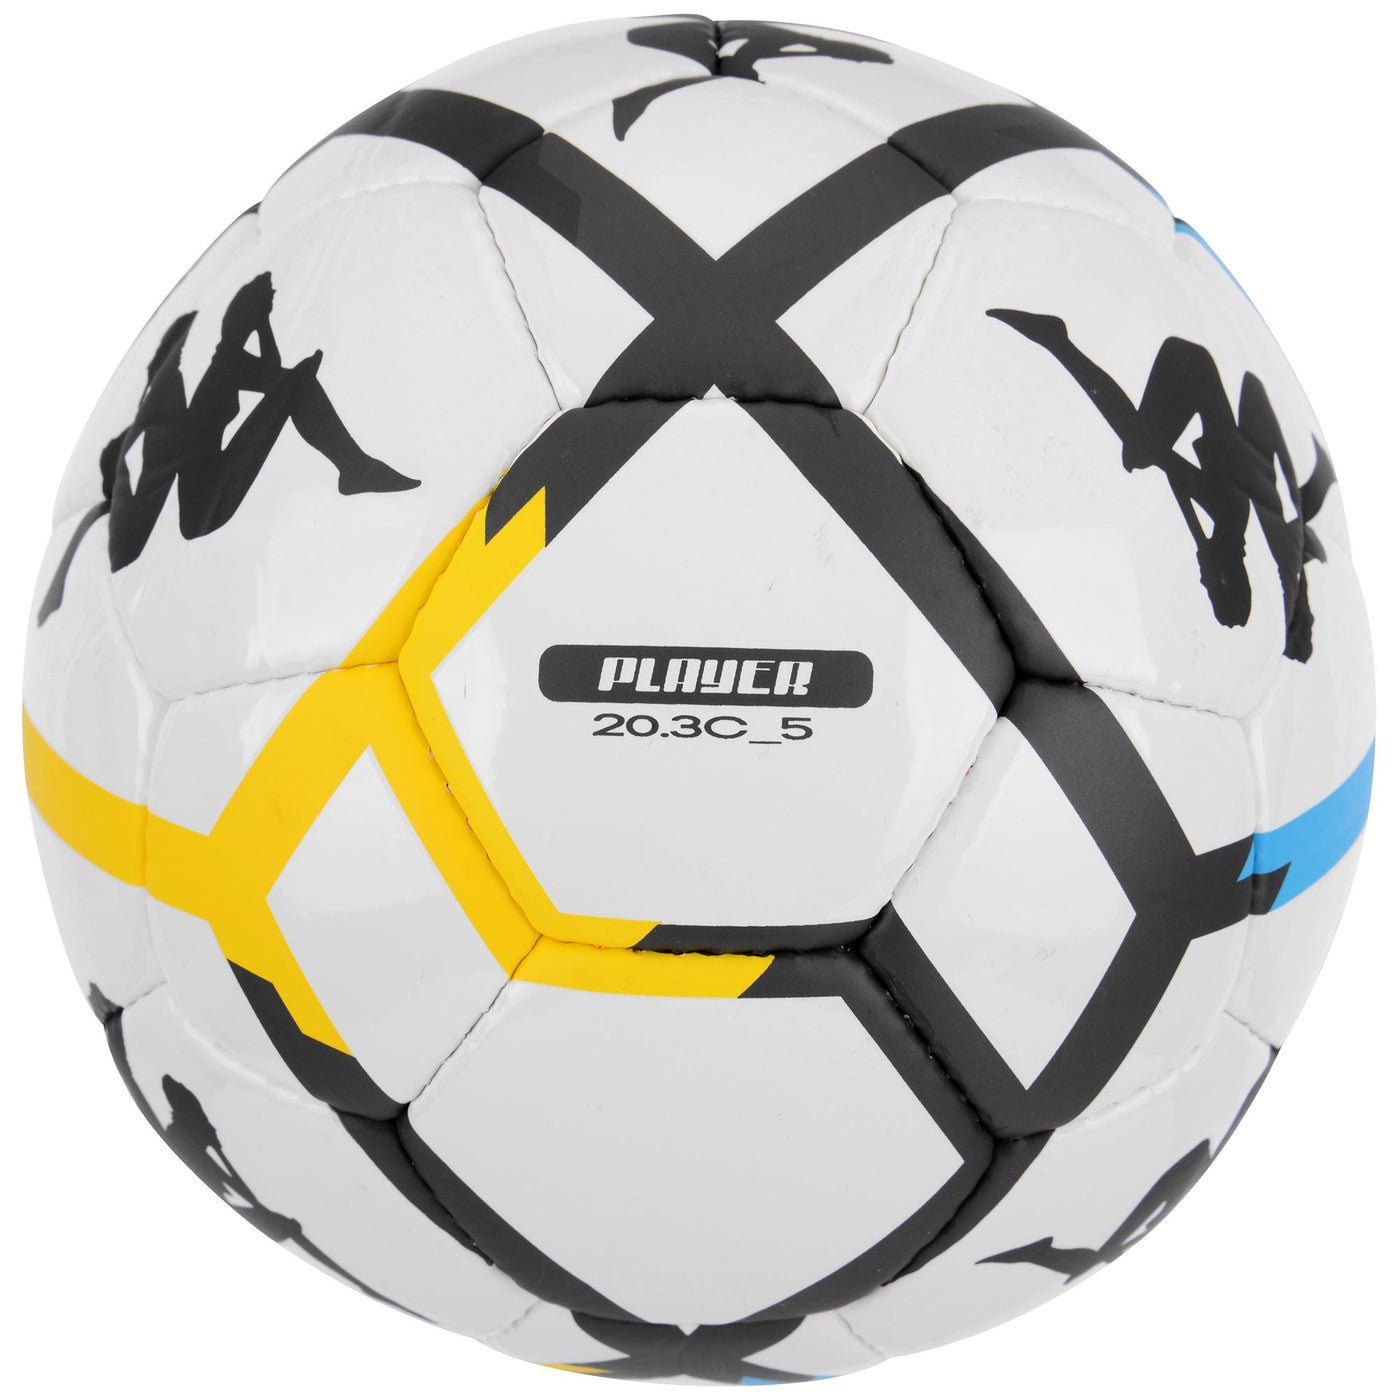 LIMIT 10 – Pre-Marked Ball w/ 6 Lines – 3″ Soft Foam – The